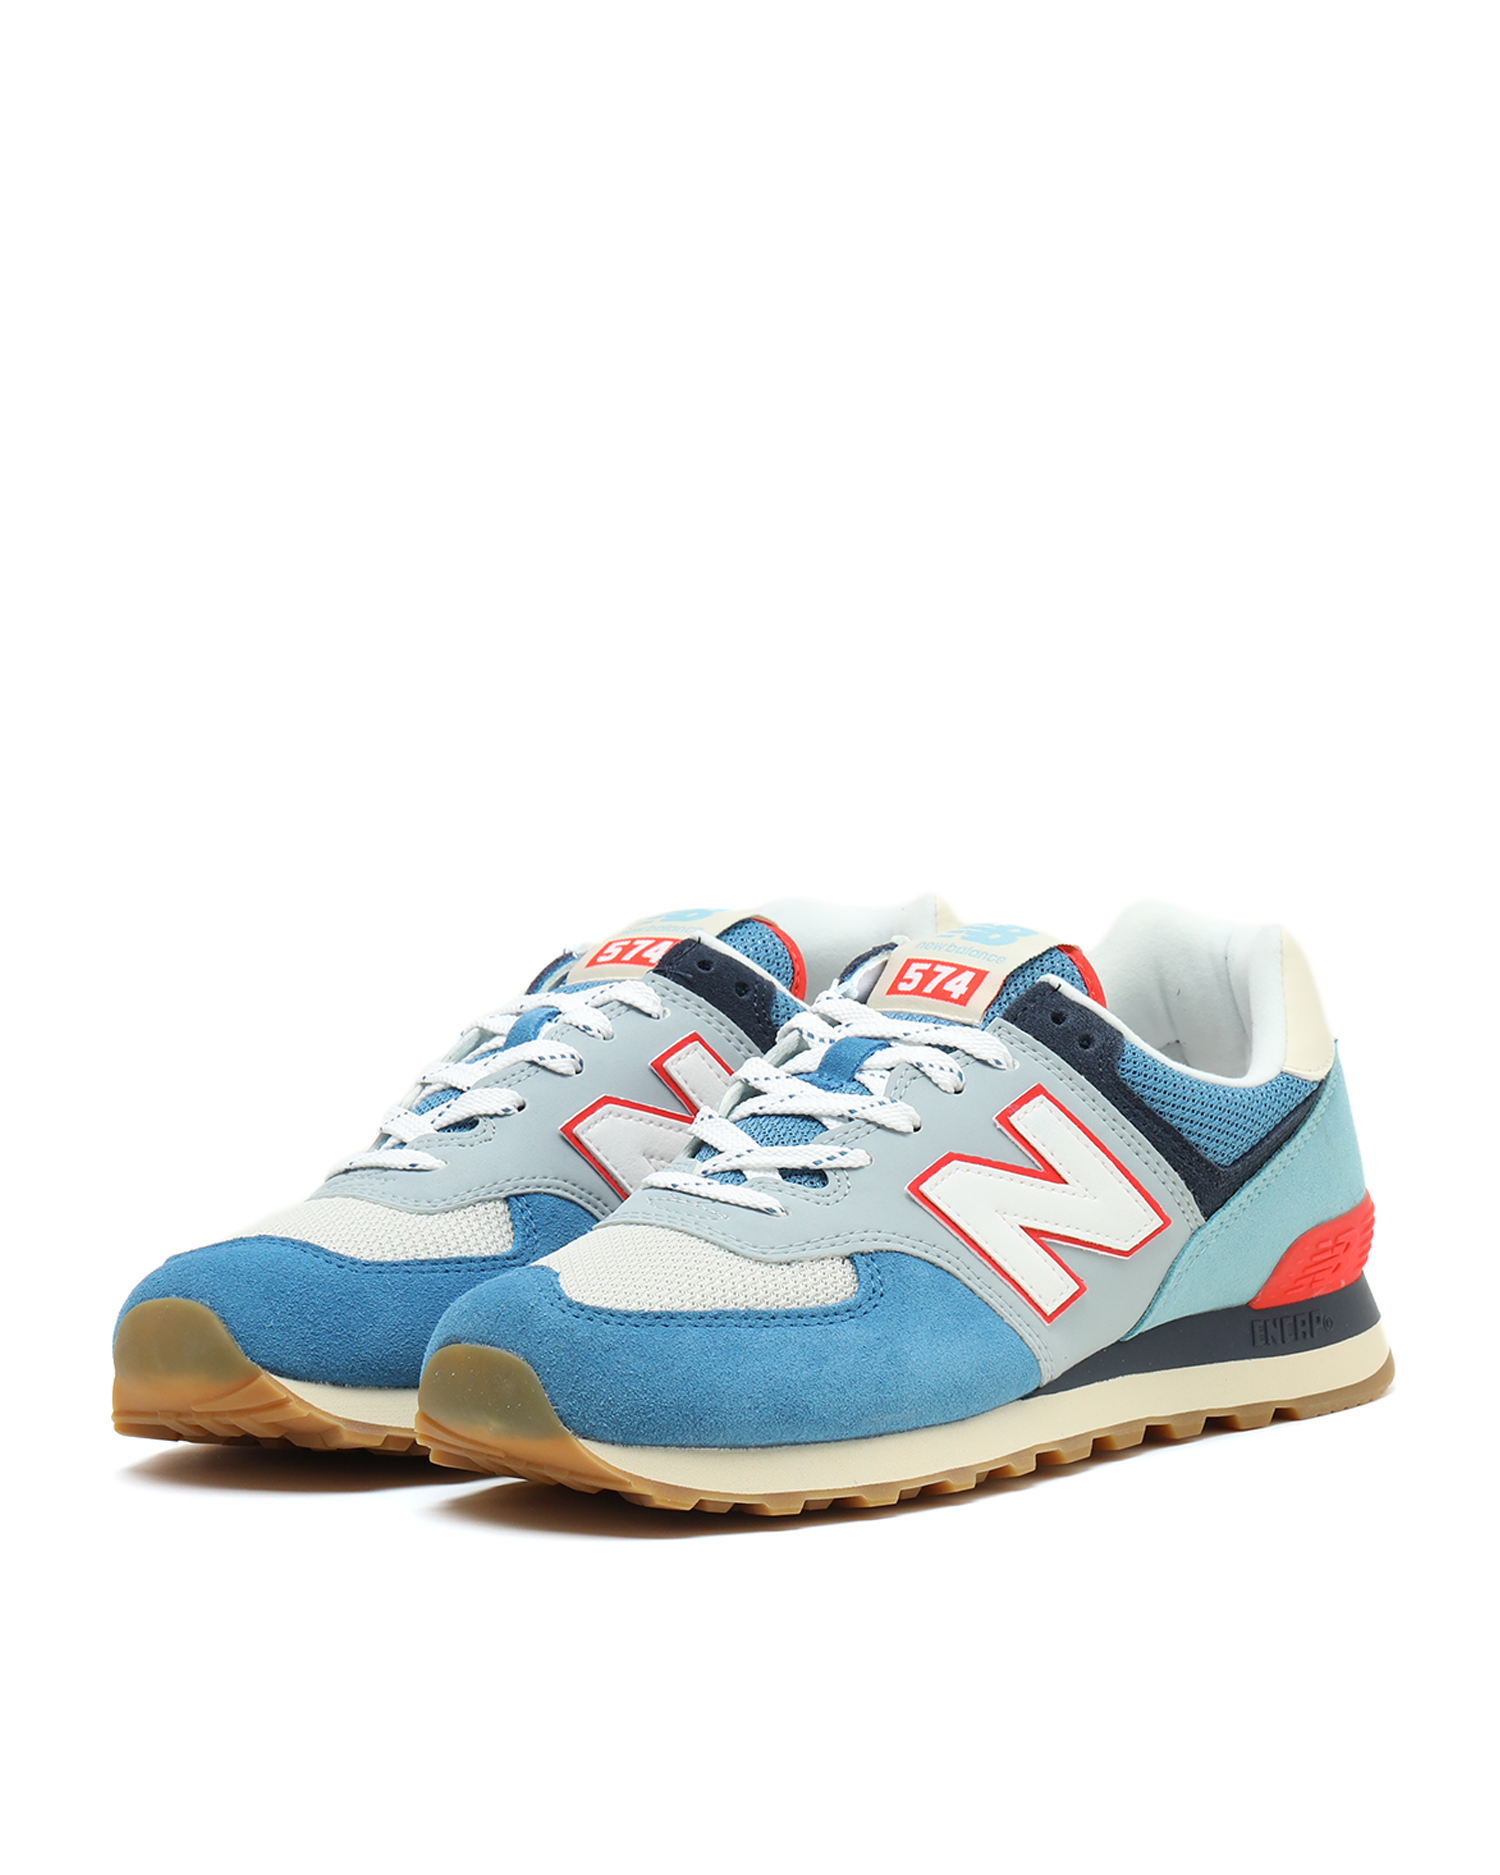 New Balance 574 sneakers